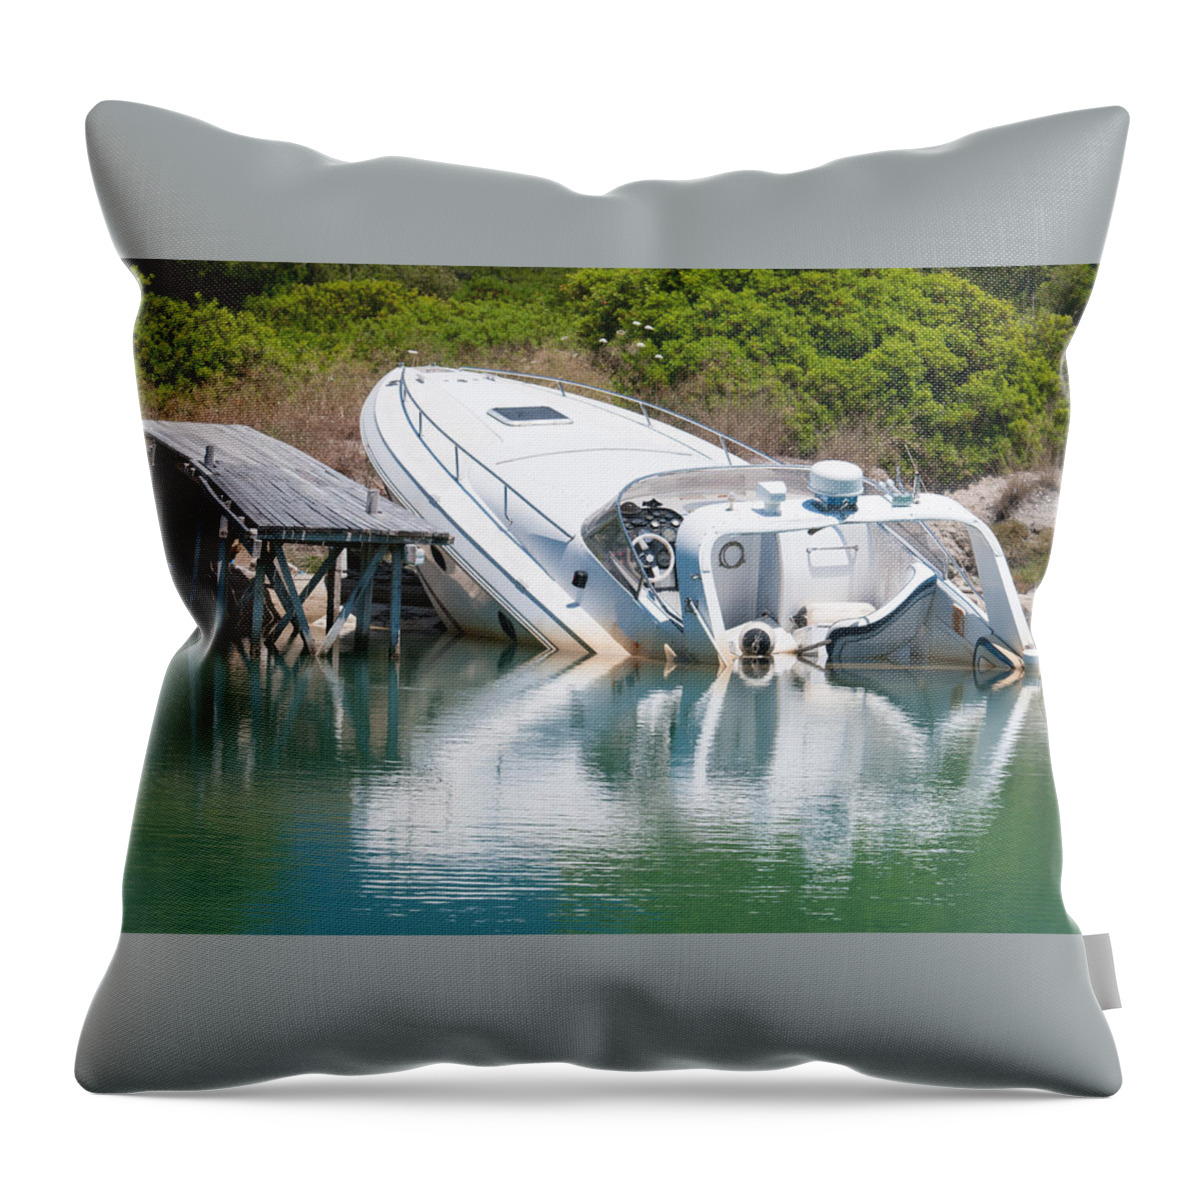 Roy Throw Pillow featuring the photograph Sinking Speedboat by Roy Pedersen